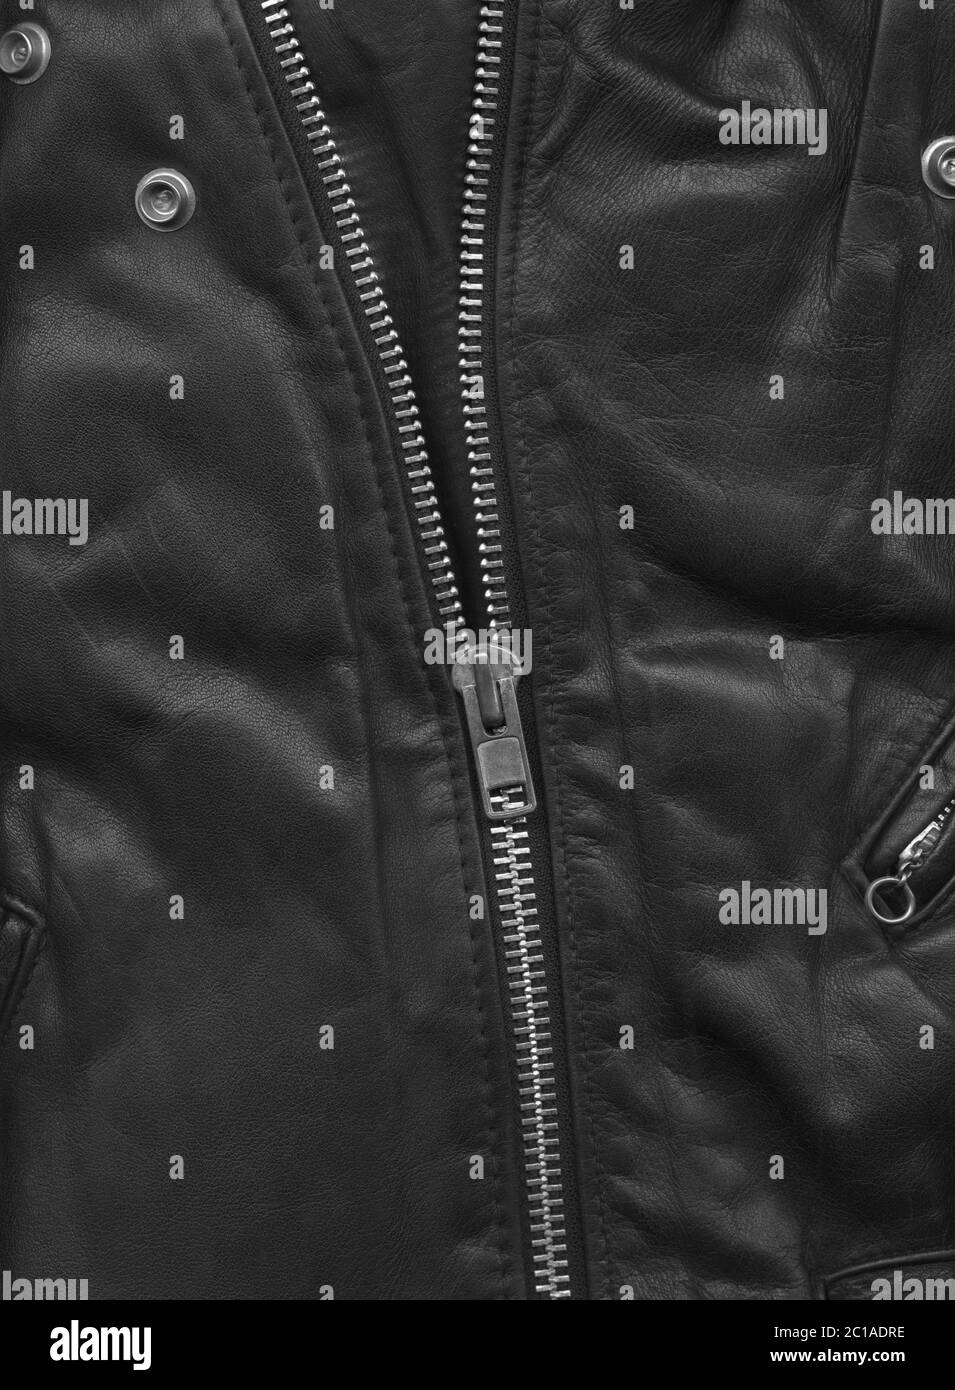 Black leather jacket close-up view. Texture Background Stock Photo